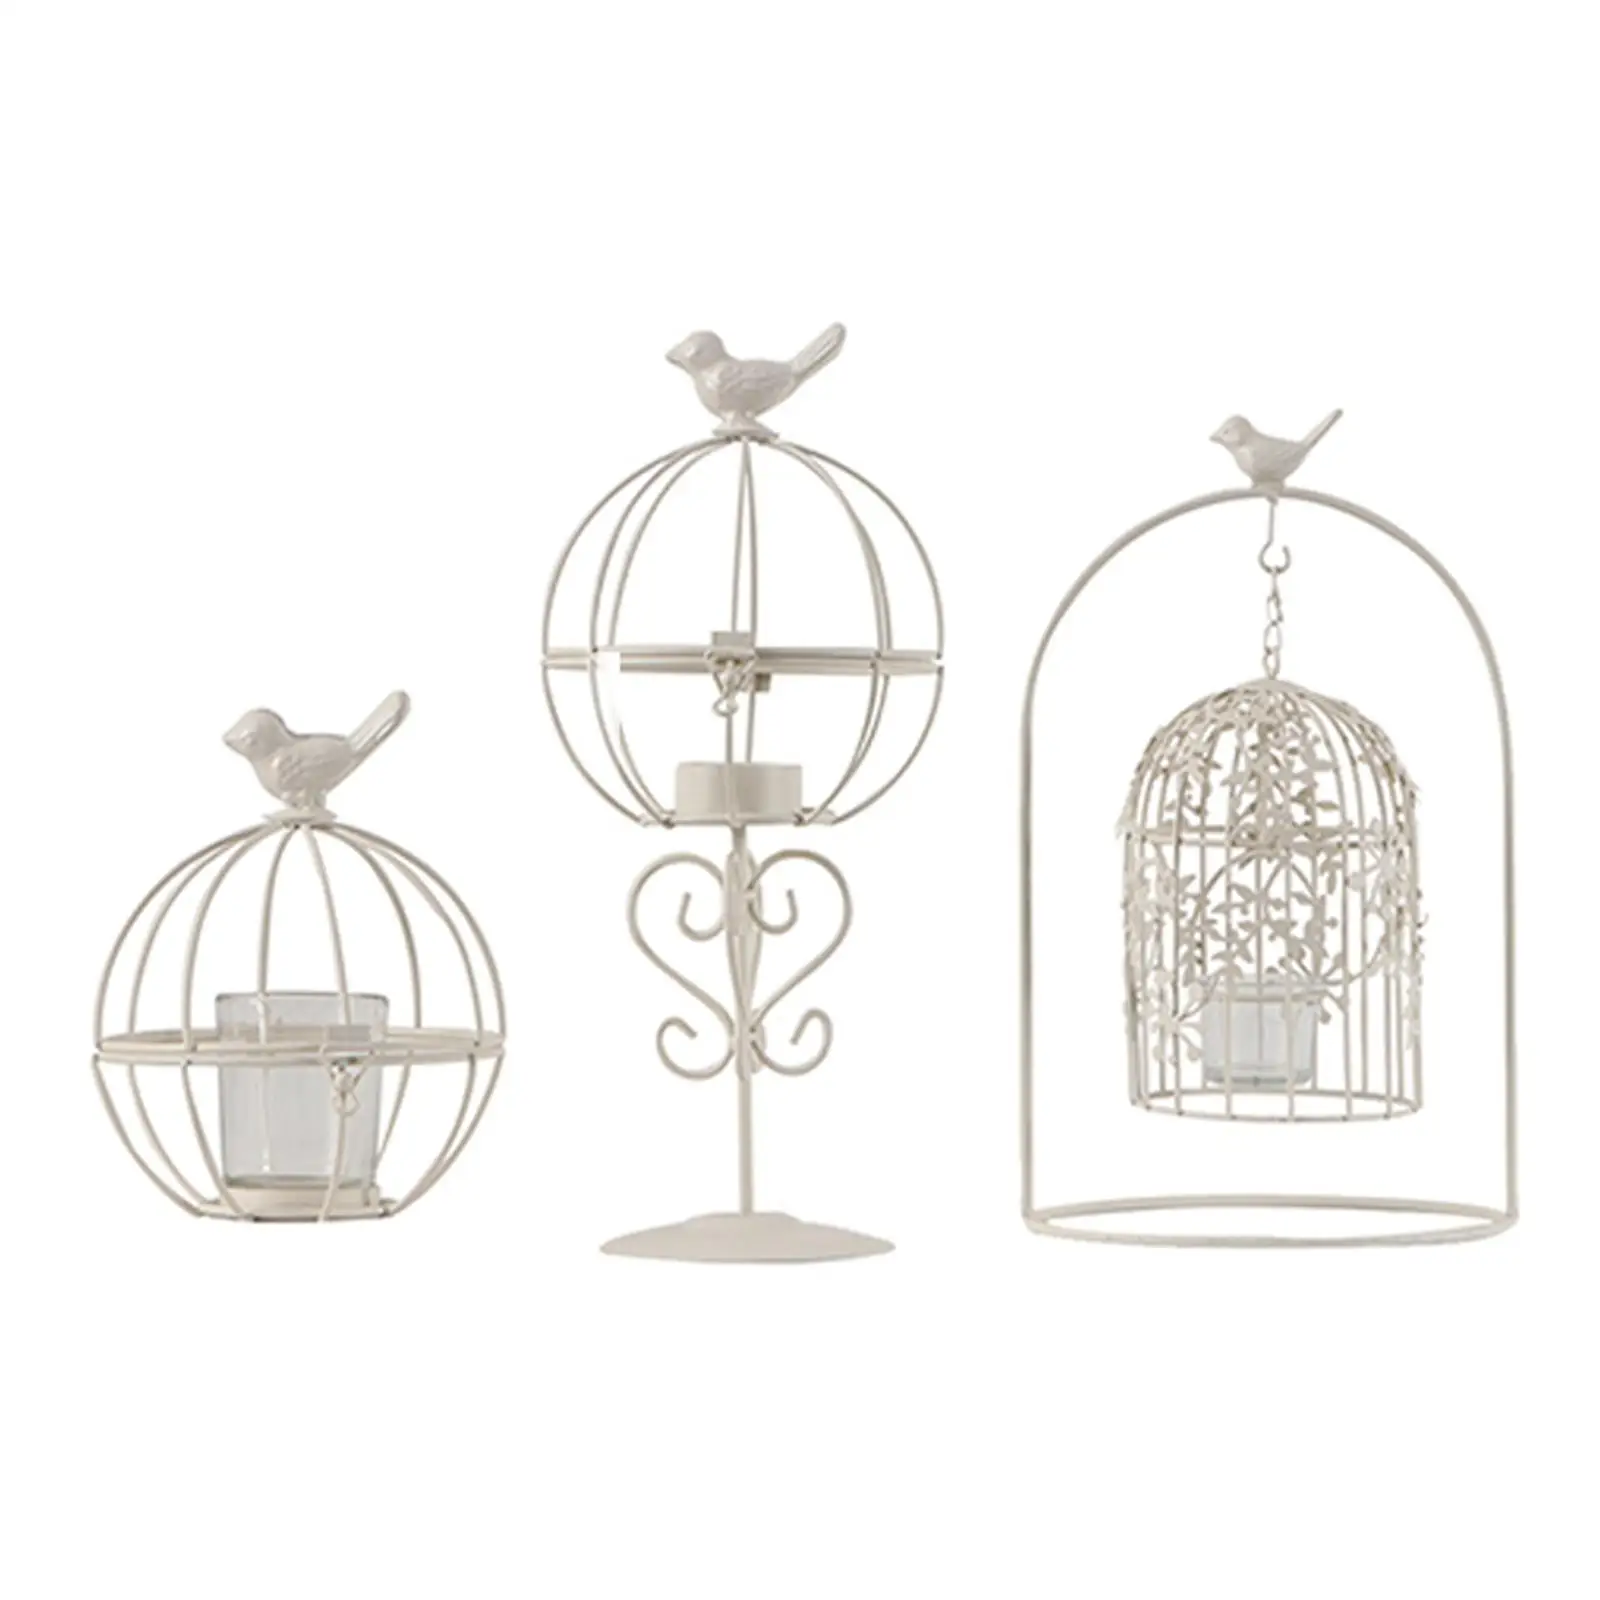 Decorative Bird Cage Candle Holder Vintage Candle Holder for Wedding Candle Centerpieces Home Living Room Holiday Decoration